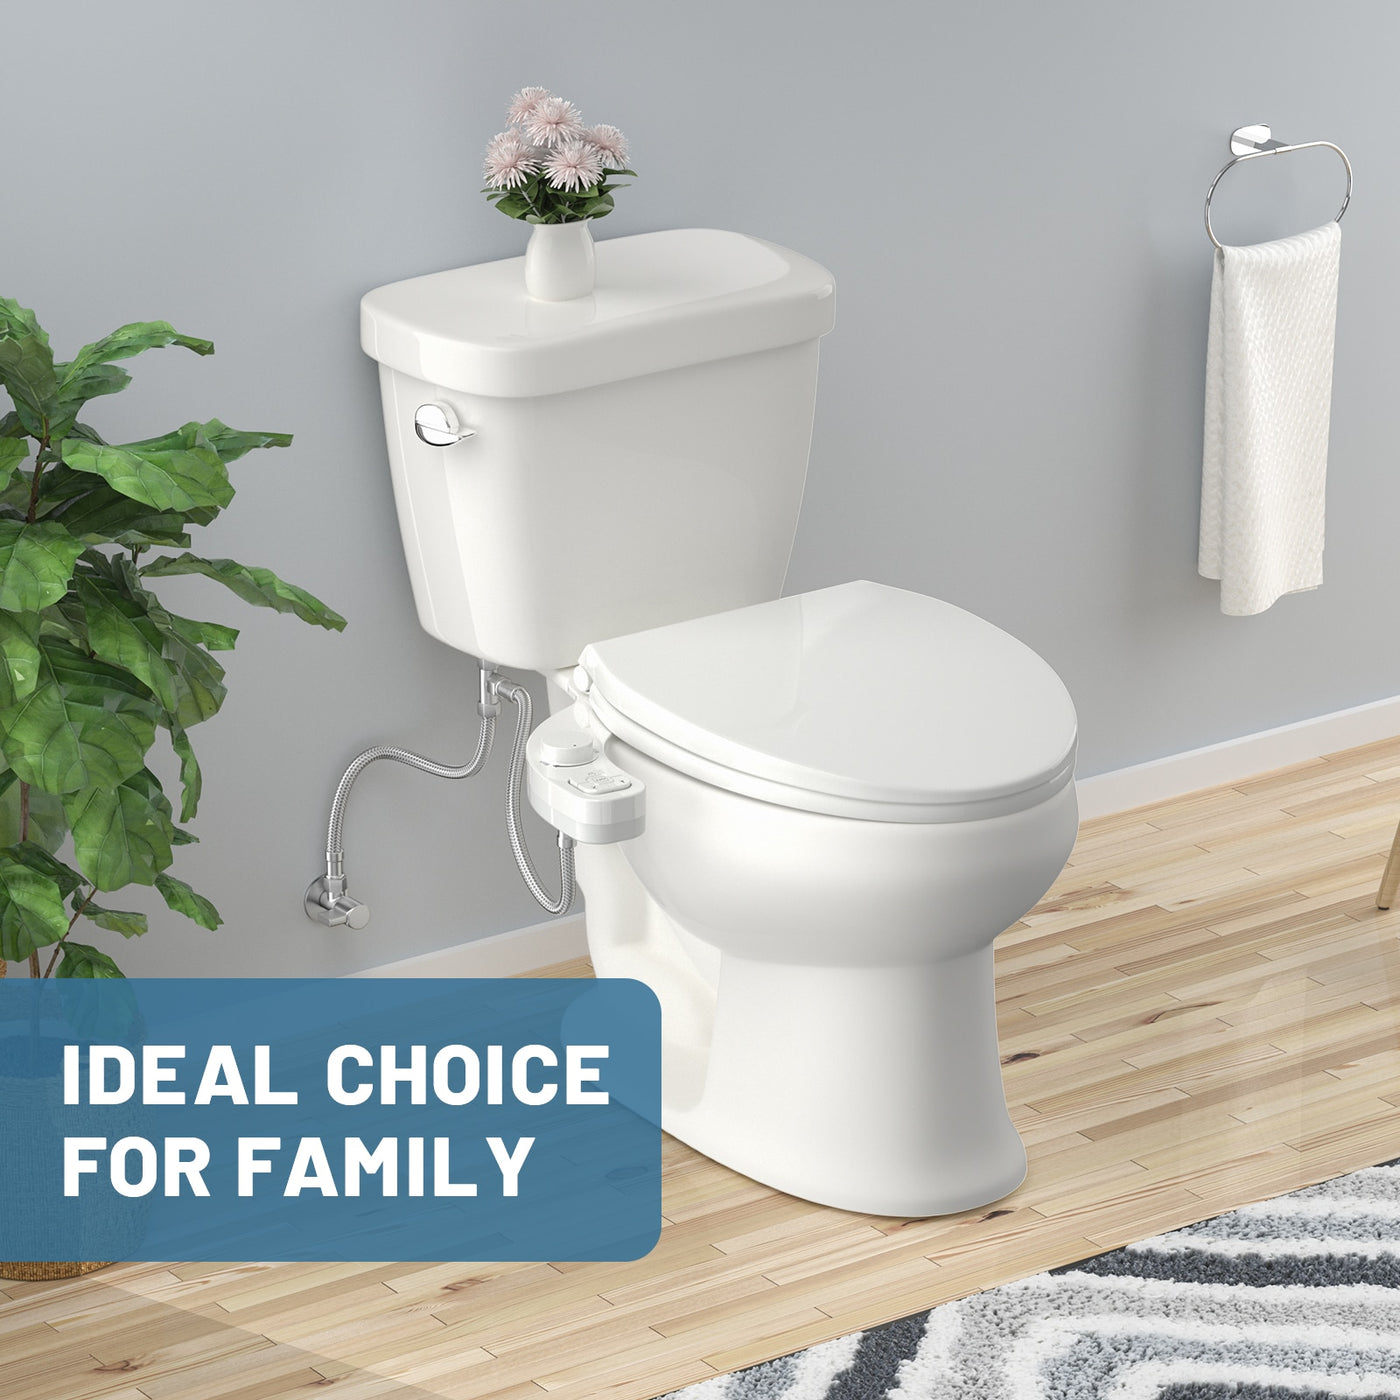 Tailboxy Non-Electric Bidet - Self Cleaning Dual Nozzle "PureClean: The Ultimate Hygiene Solution - Introducing the Bidet"